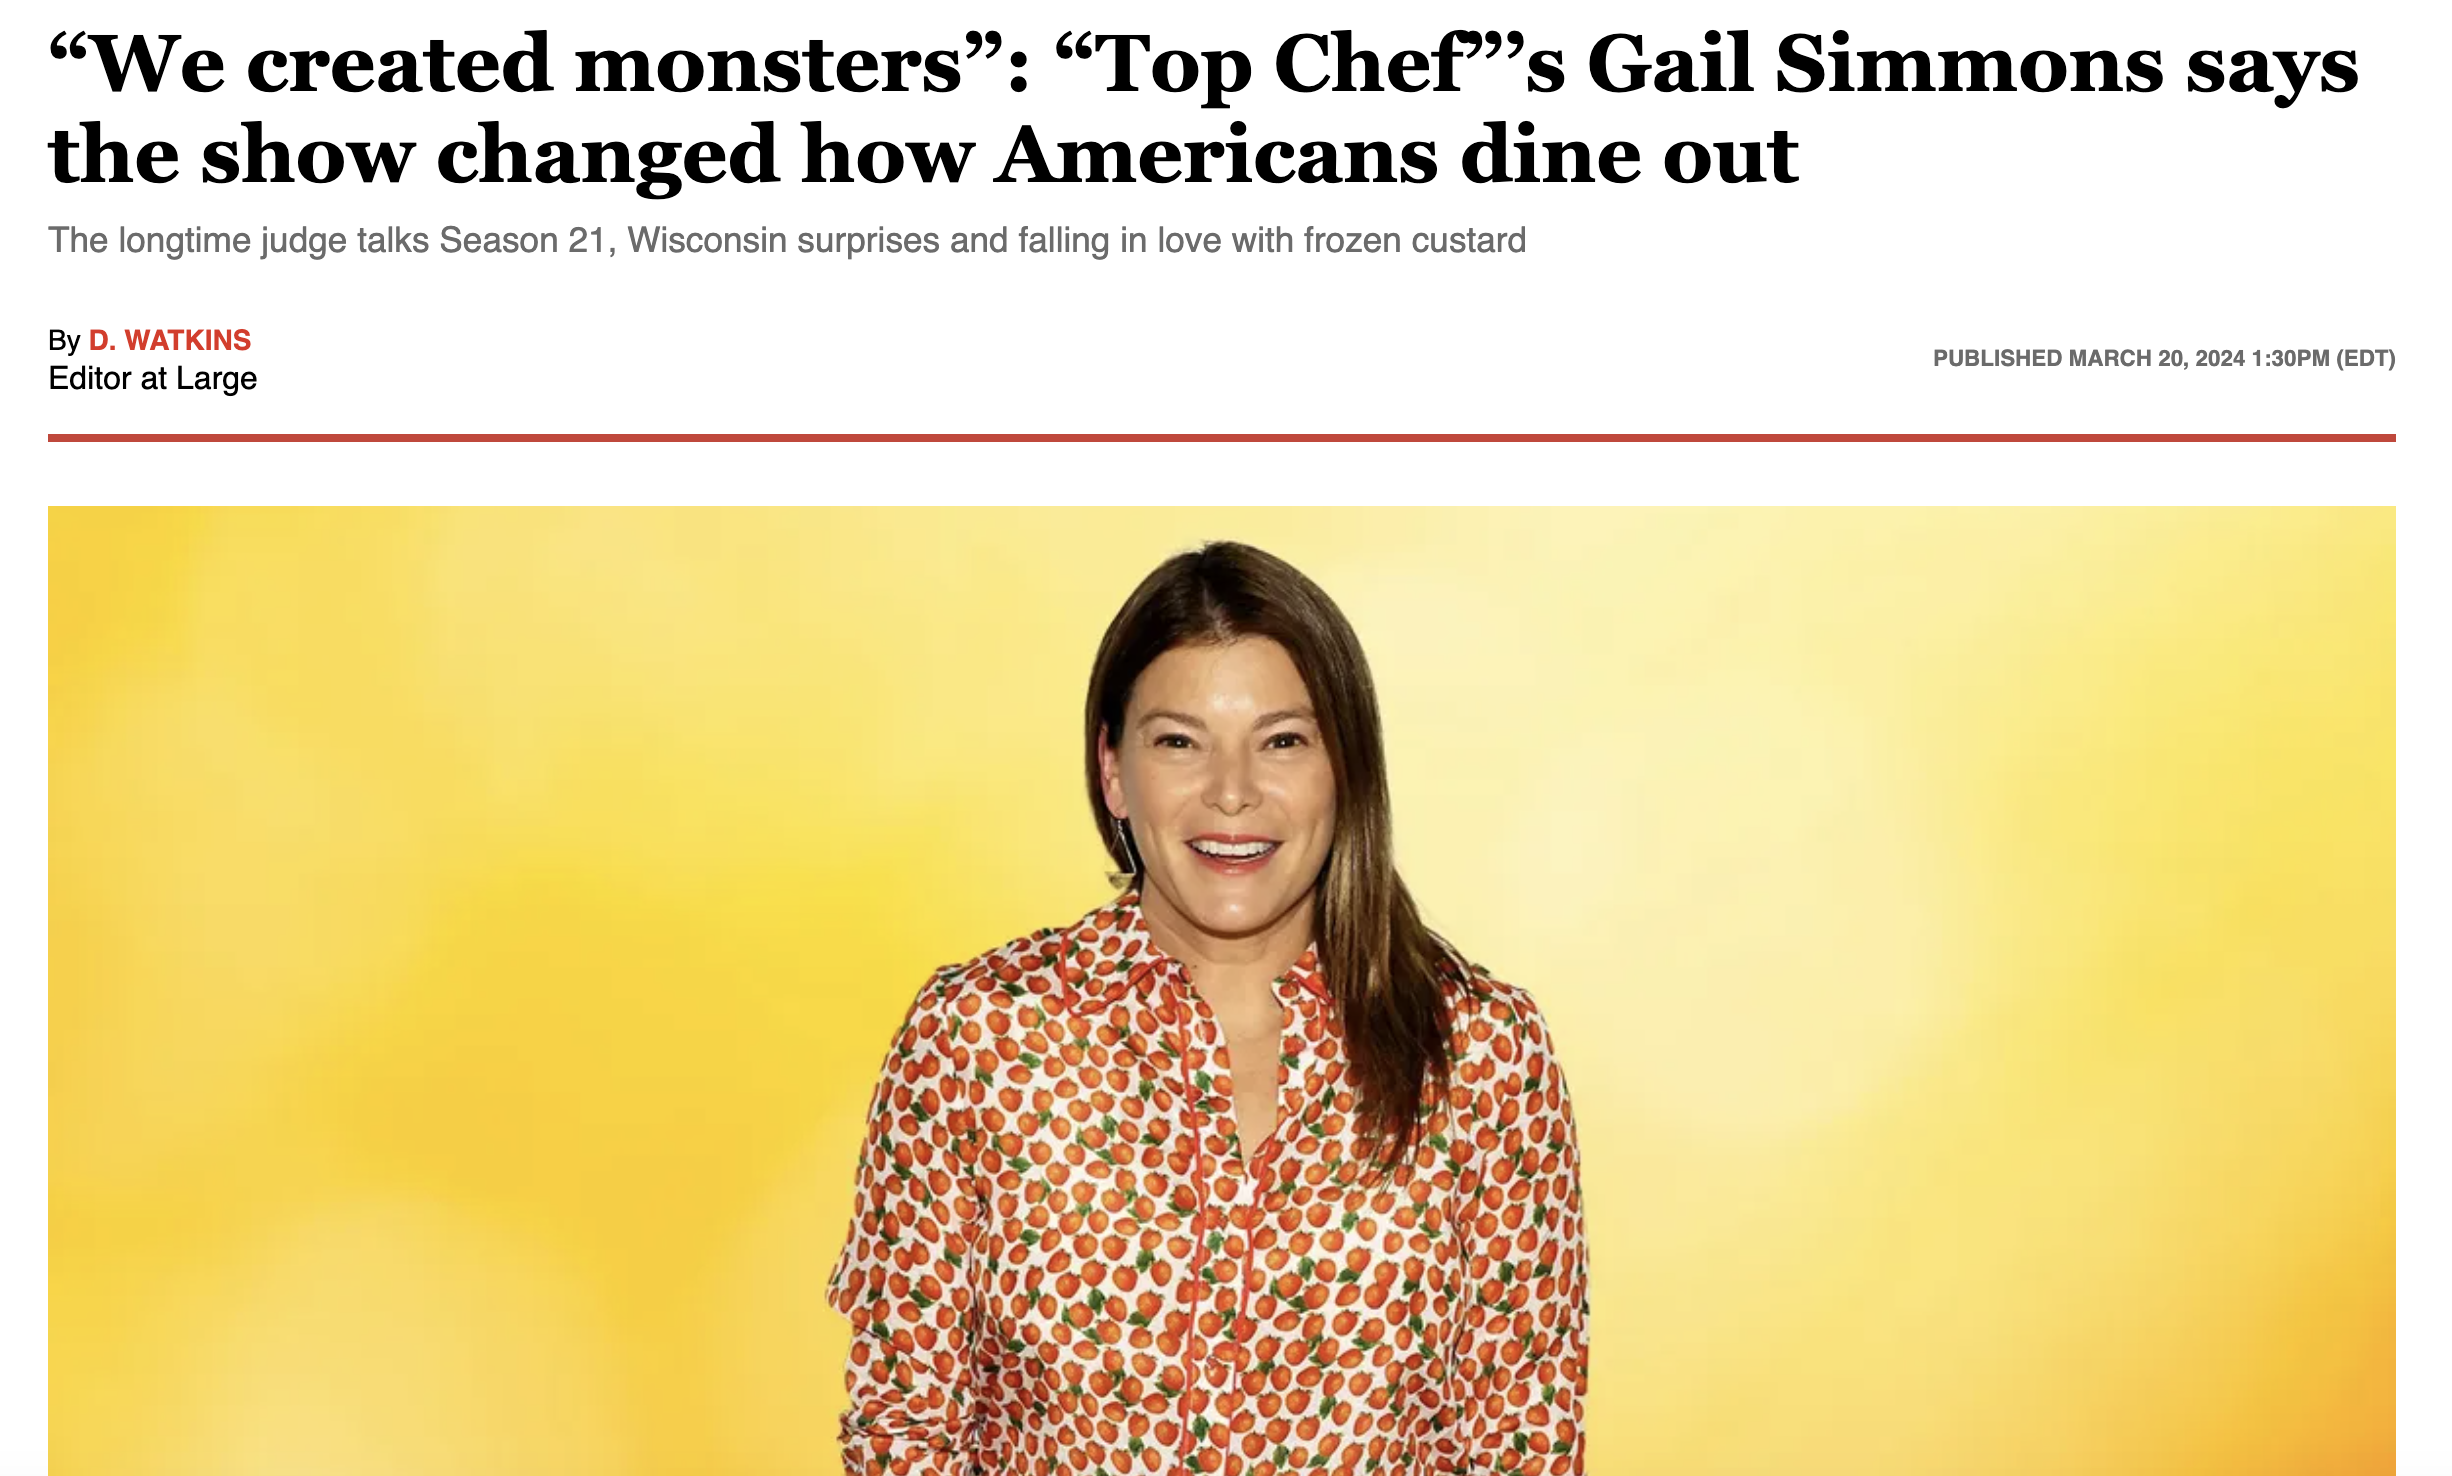 “We created monsters”: “Top Chef”’s Gail Simmons says the show changed how Americans dine out